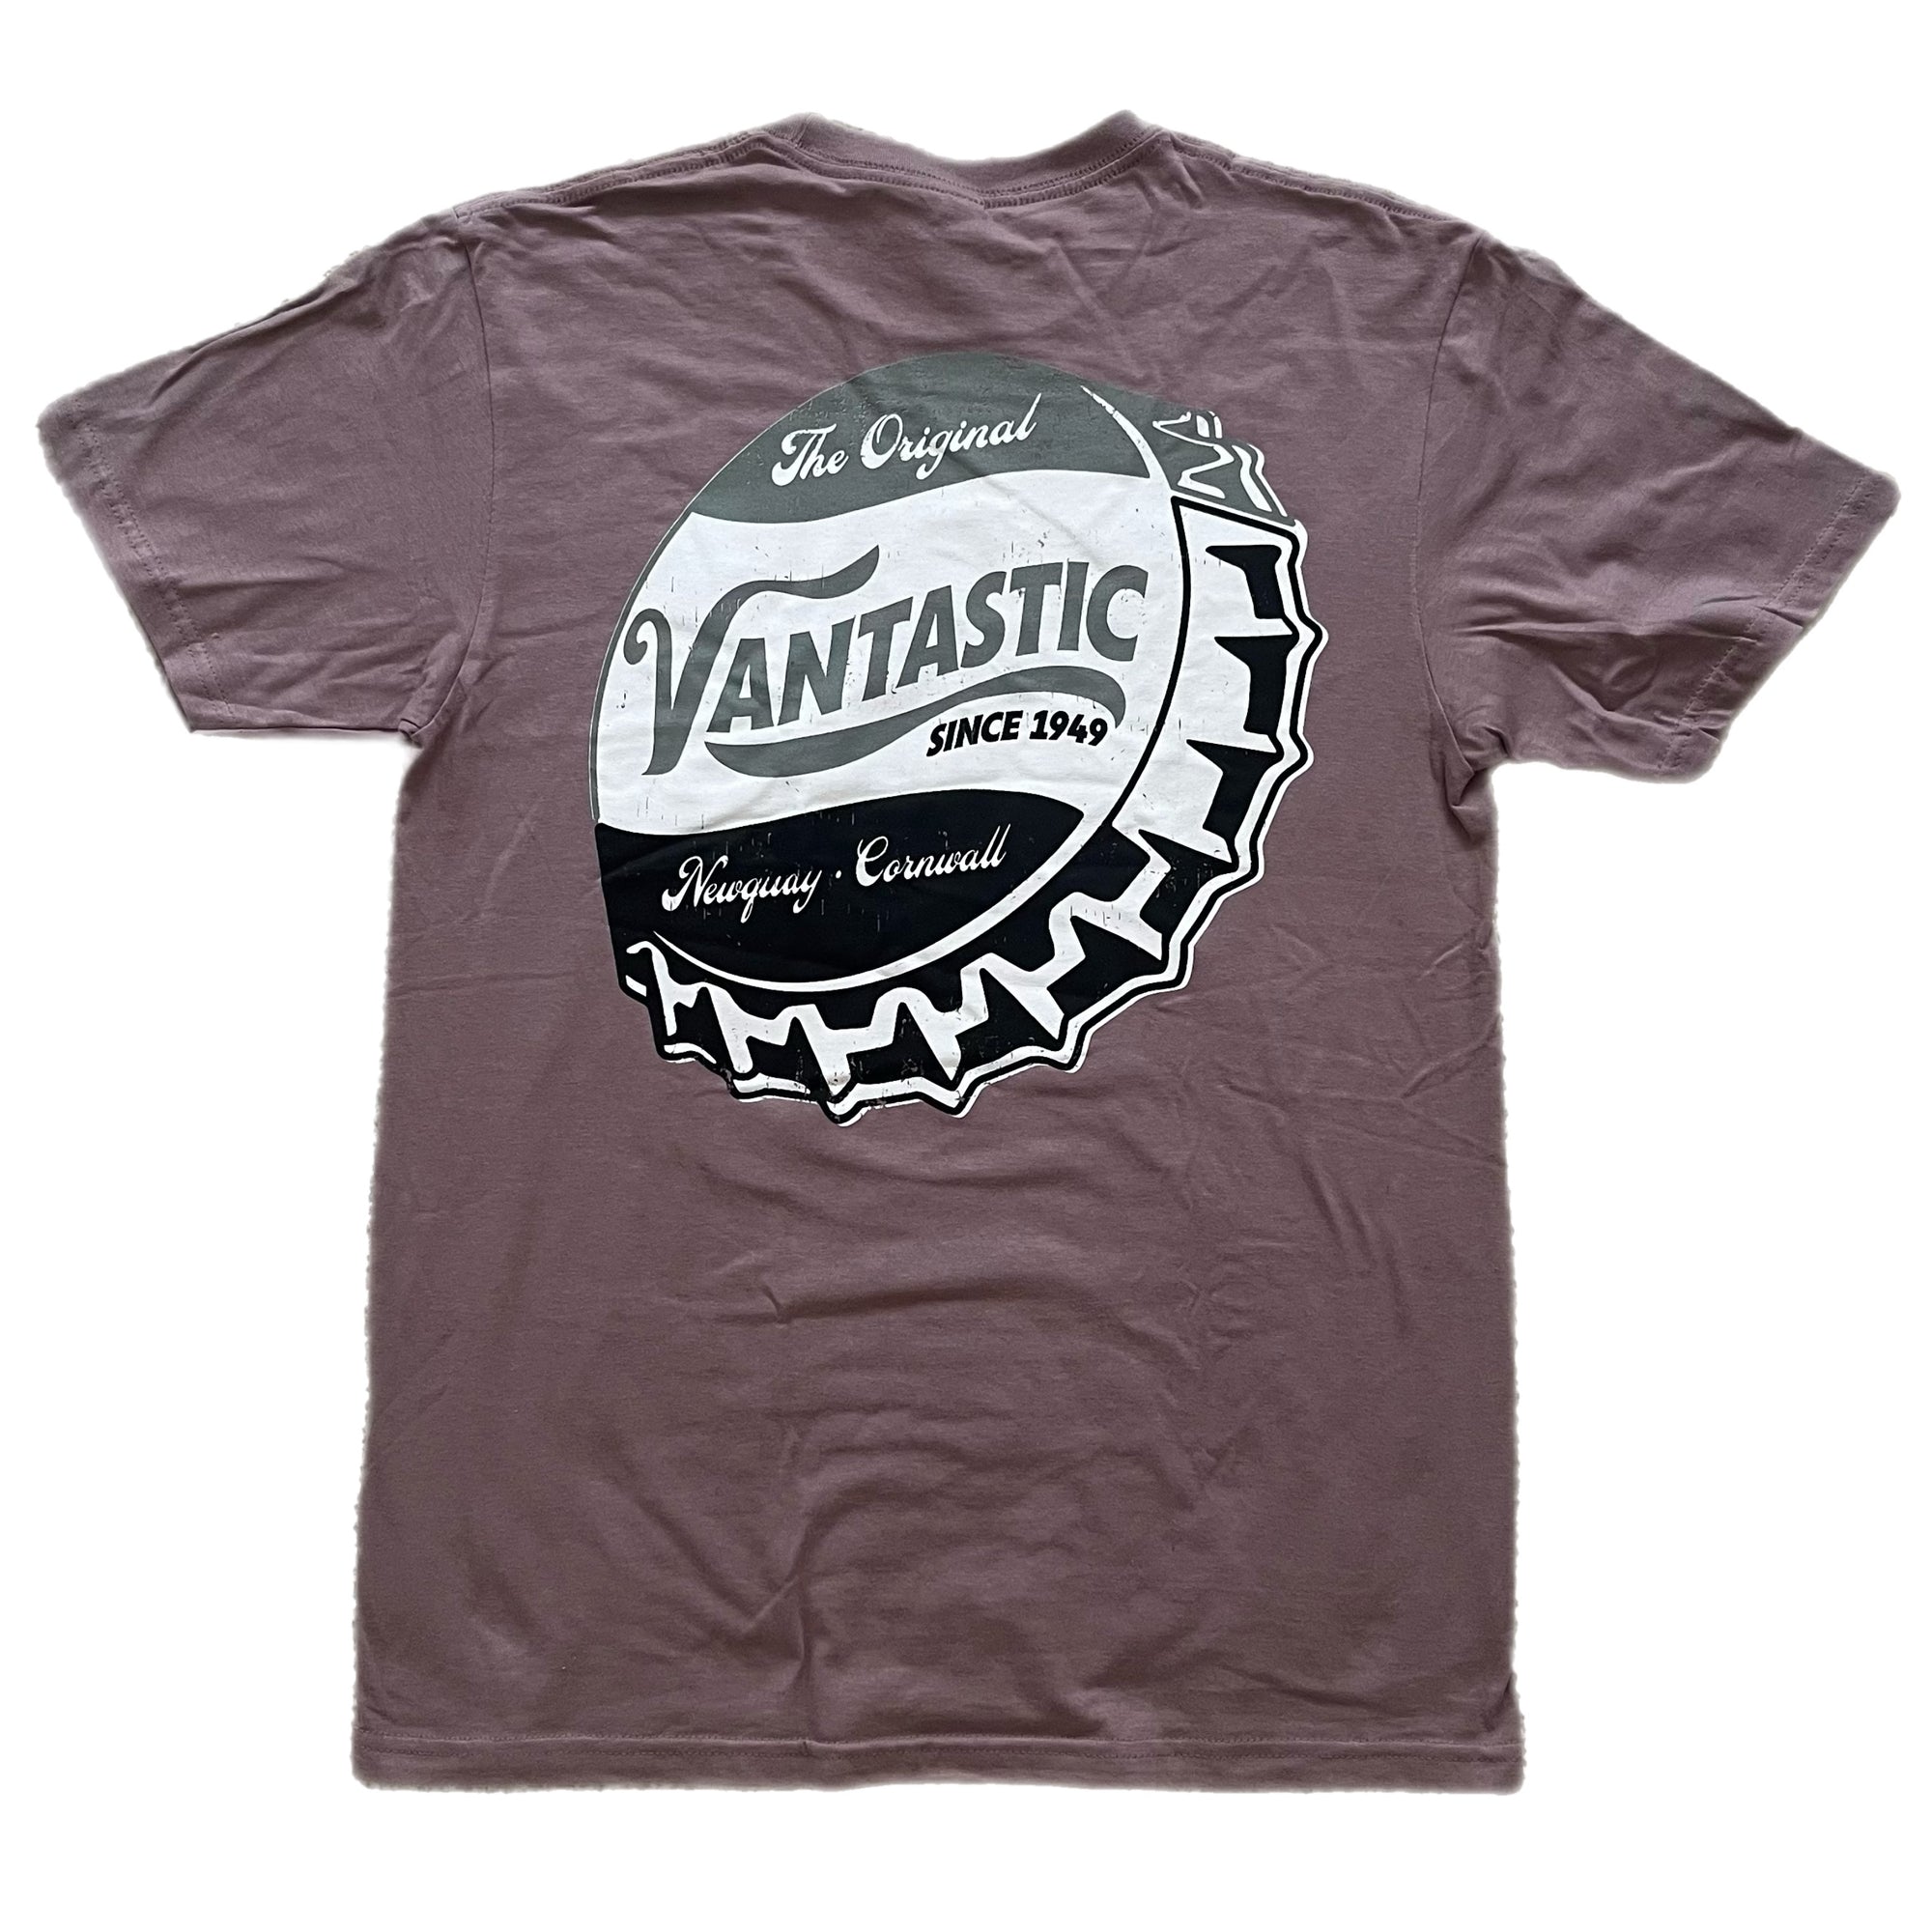 Ice Cold Short Sleeve T-shirt - Dusty Lilac